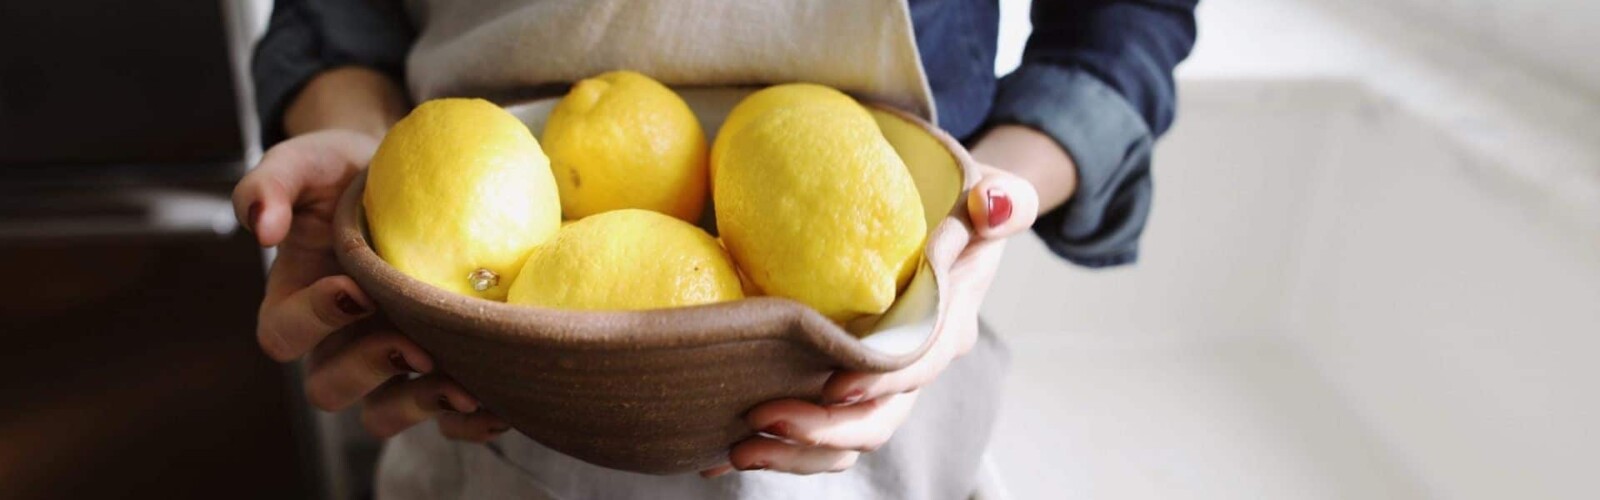 Photo of a woman in an apron holding a bowl full of lemons while standing next to a sink in a kitchen